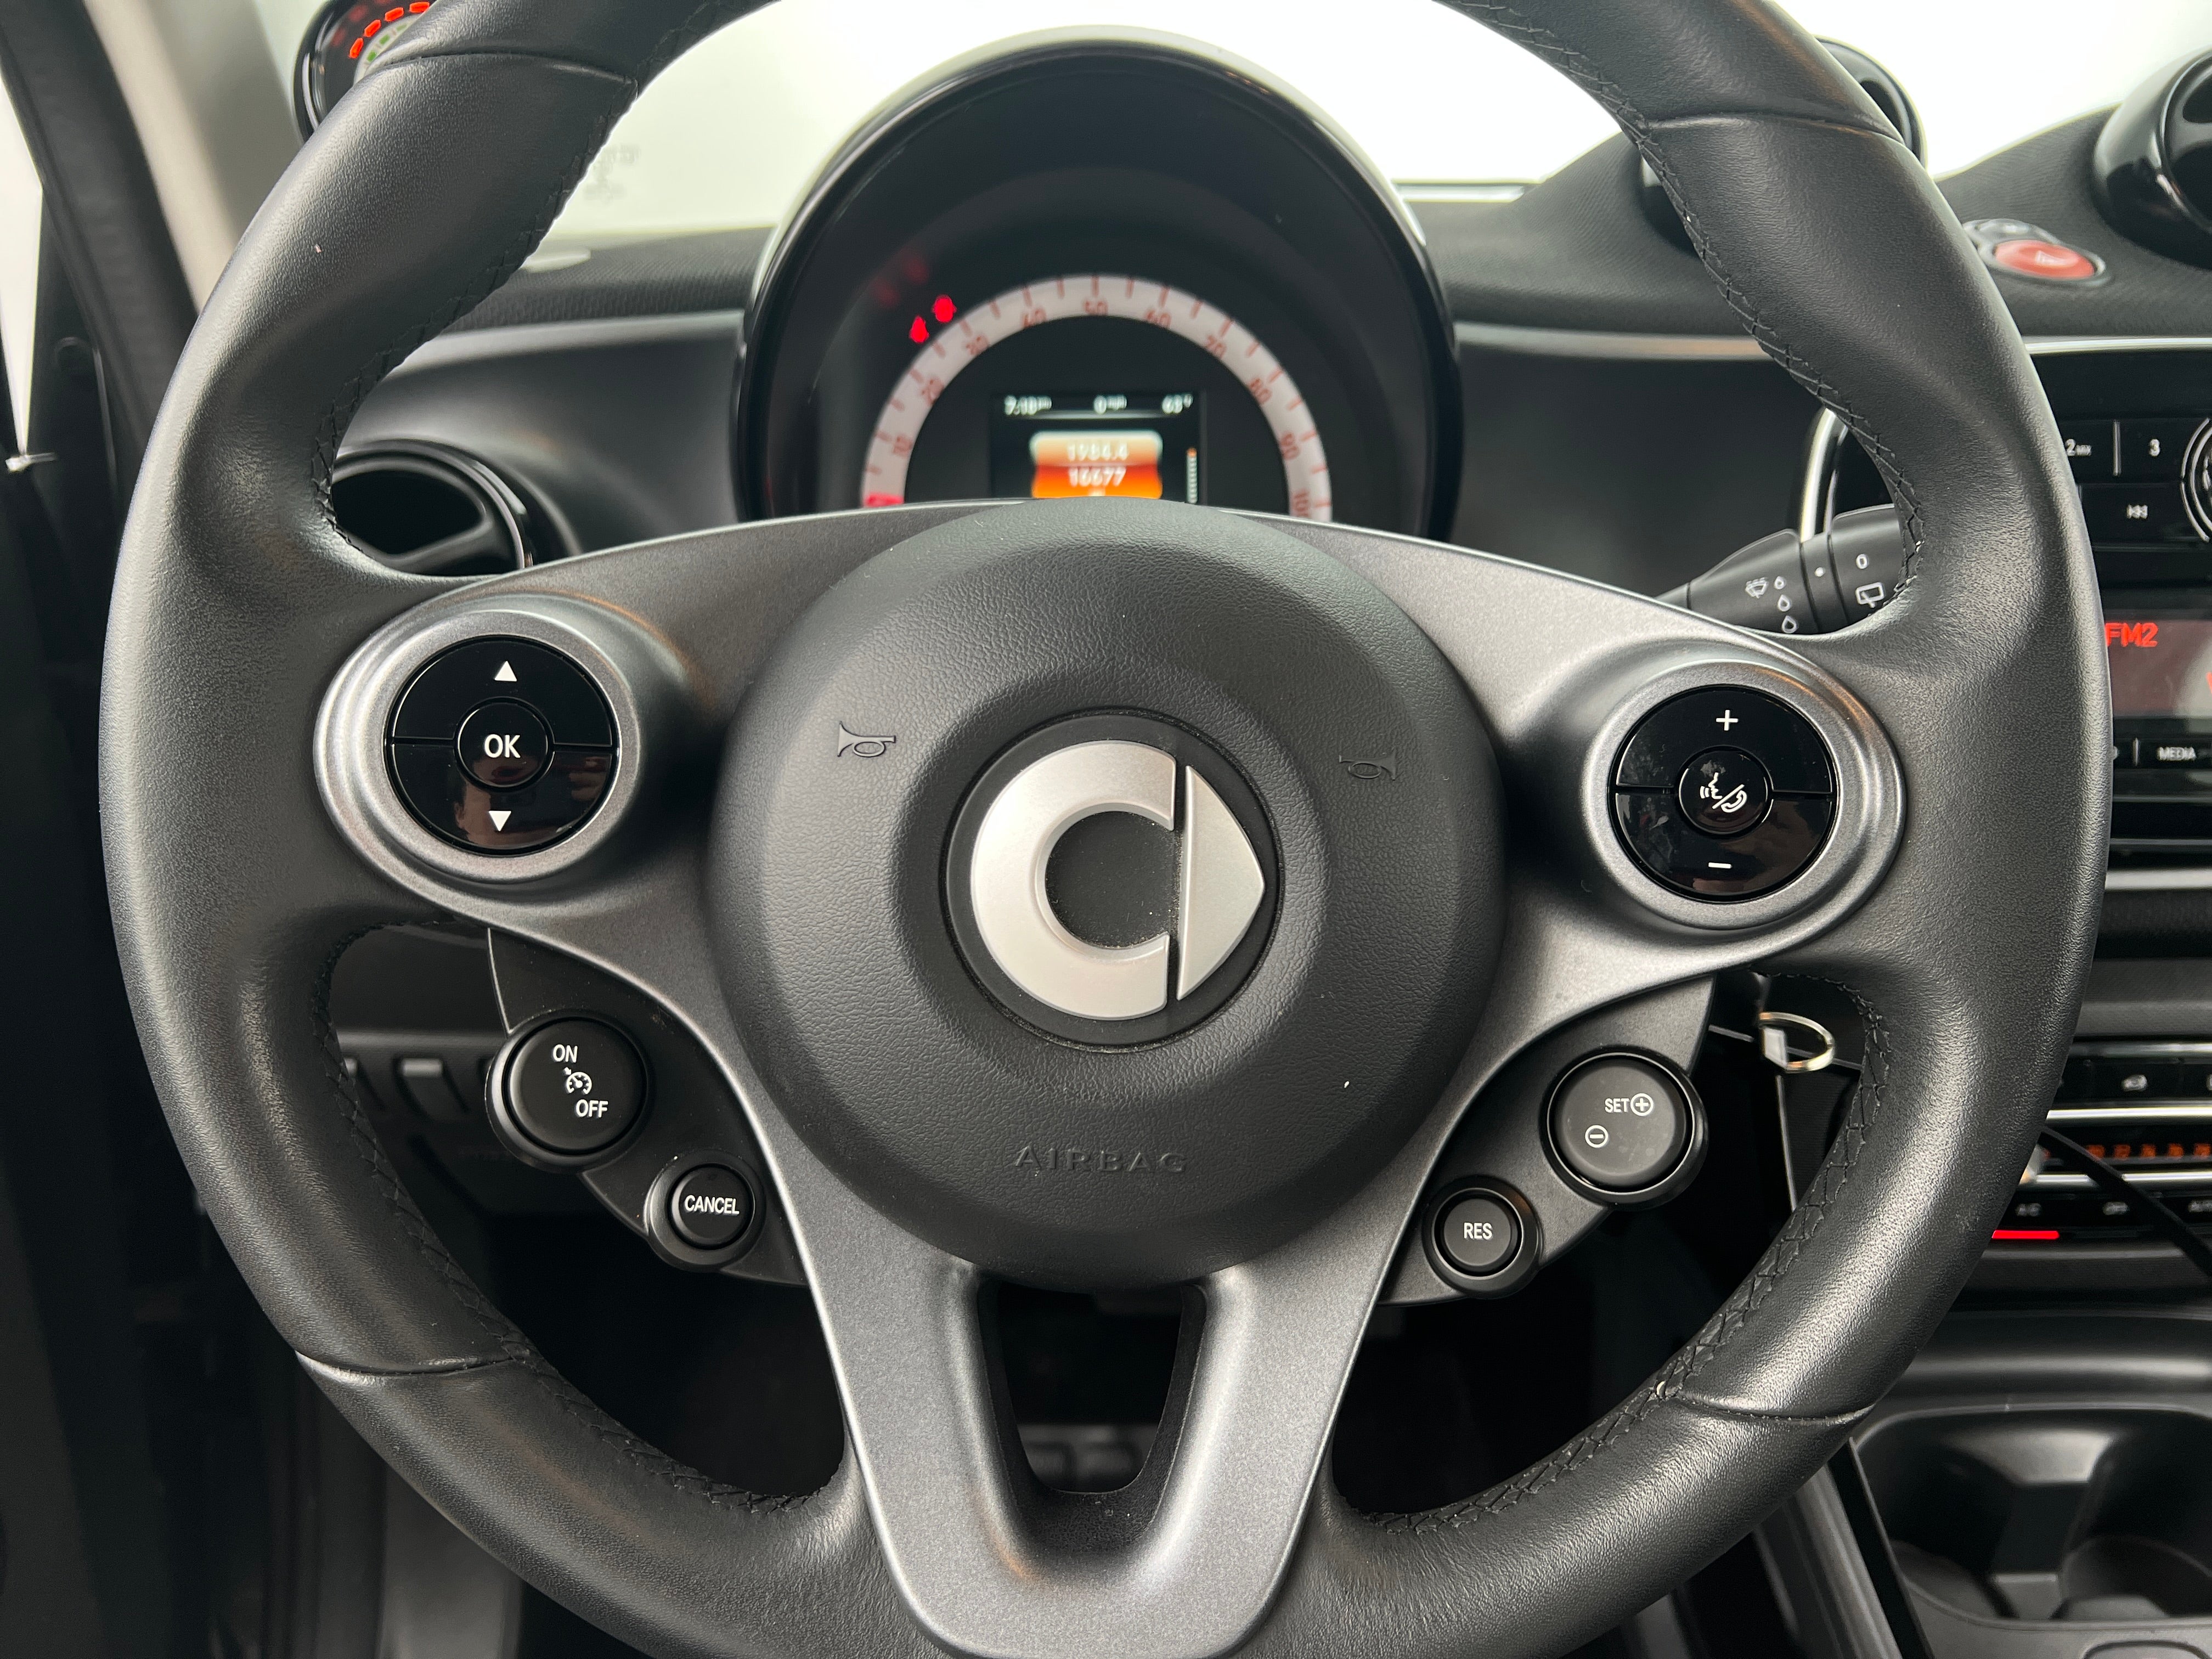 Used 2018 smart fortwo passion with VIN WMEFJ9BA5JK262573 for sale in Auburn, WA